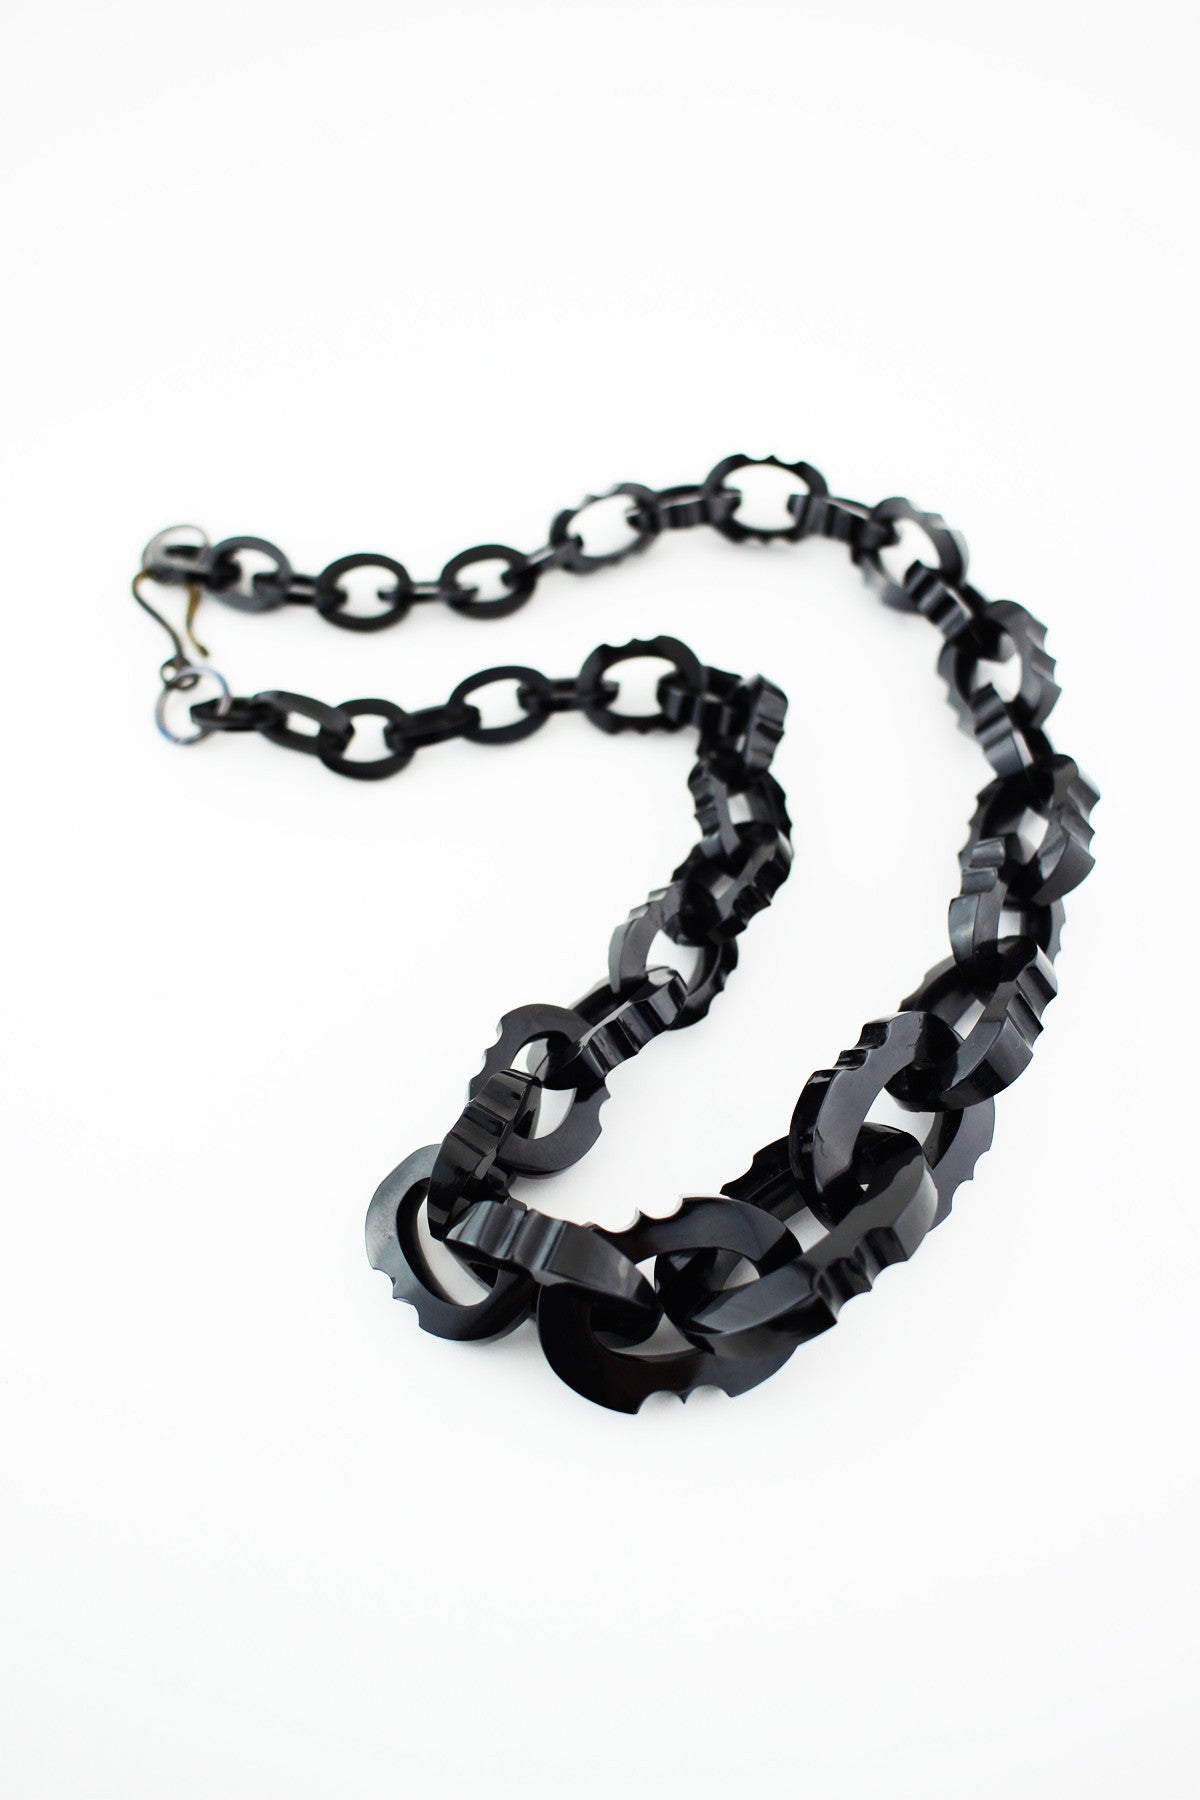 Rare Antique Victorian Genuine Whitby Jet Link Necklace